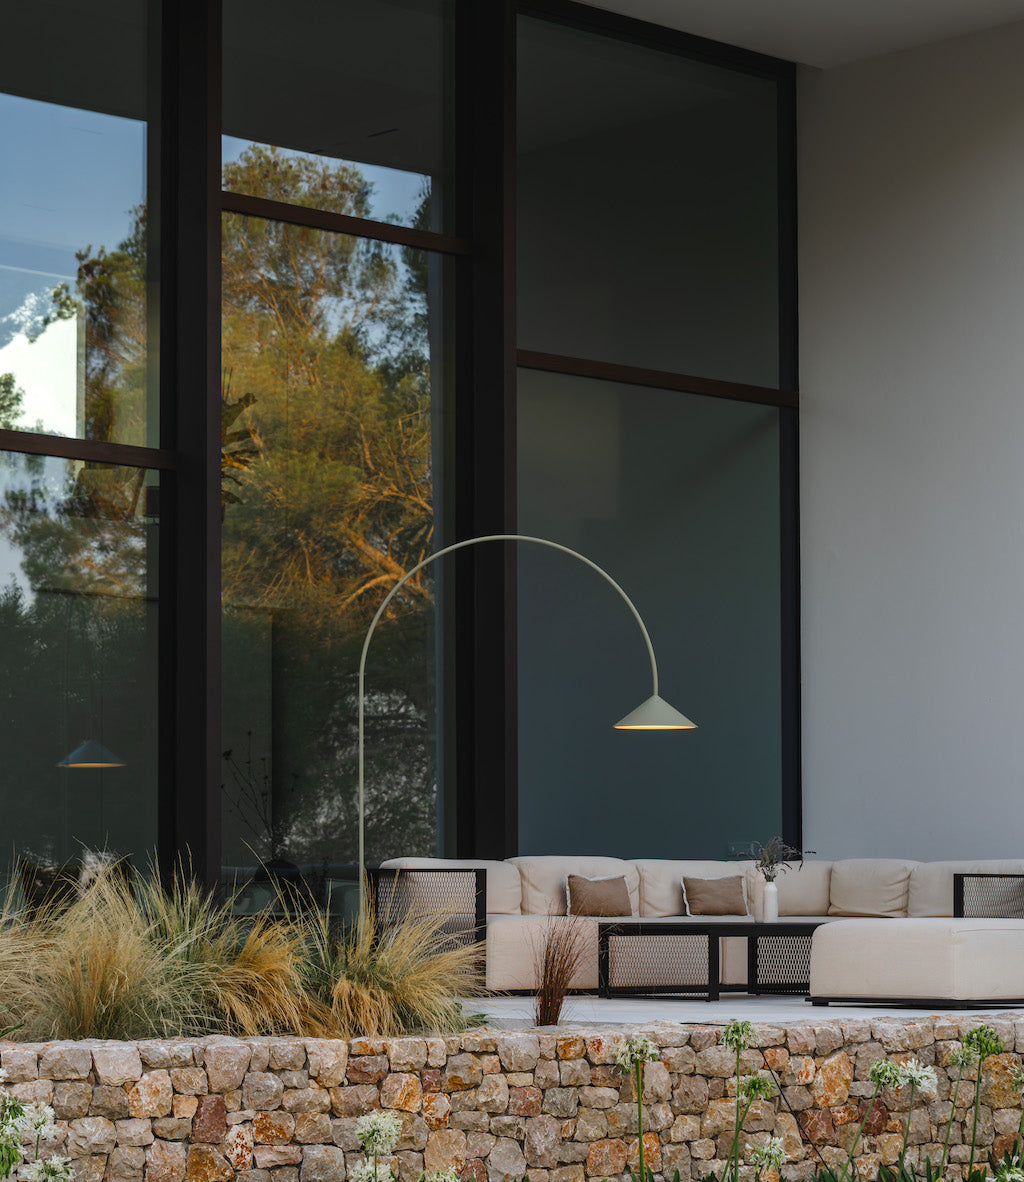 Out lamp by Vibia, design Victor Carrasco